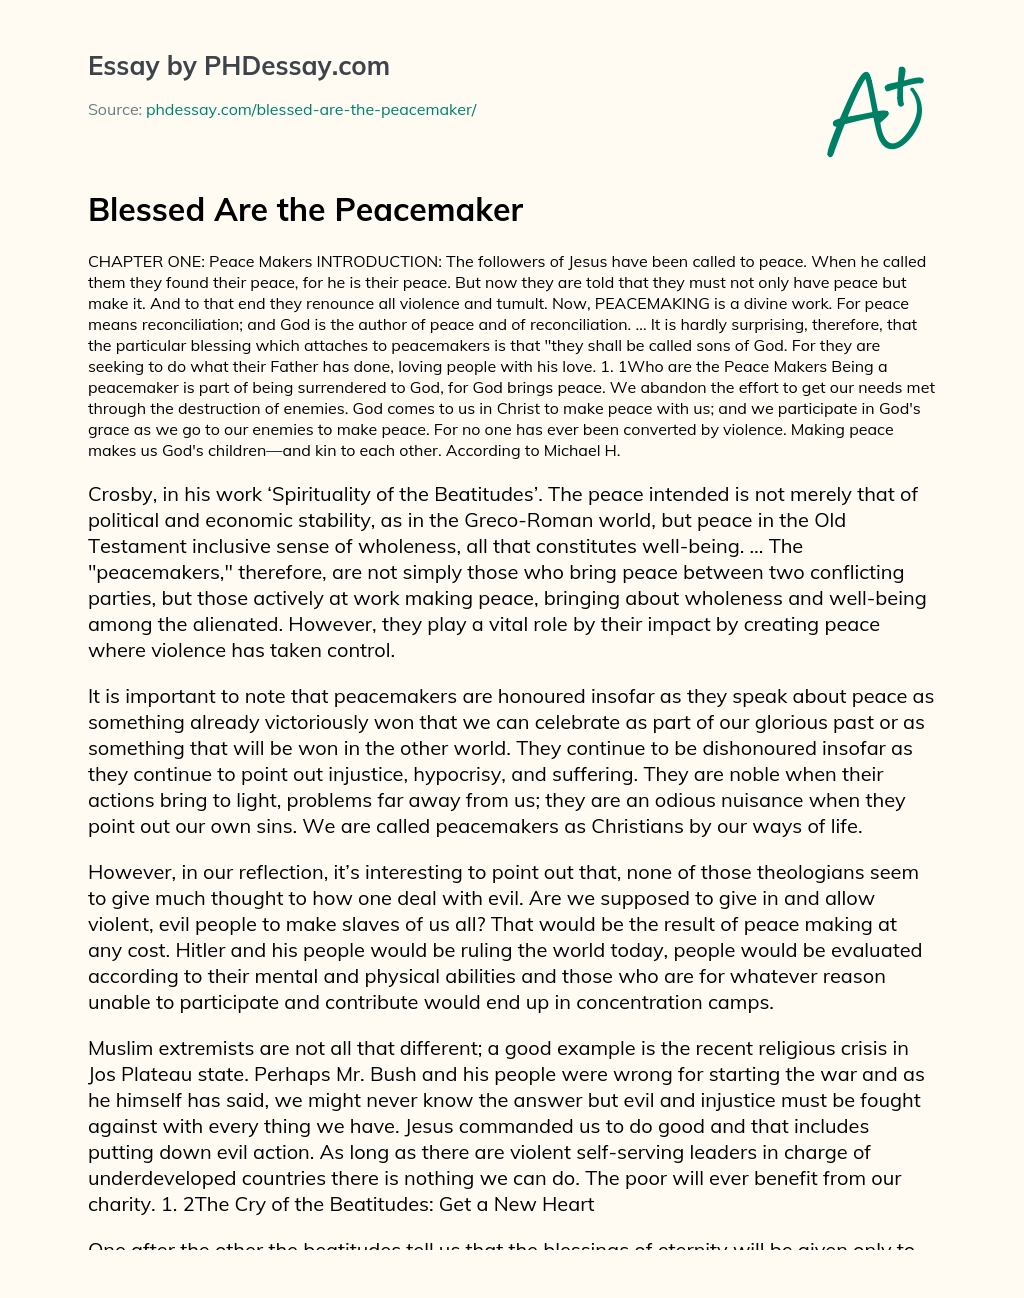 Blessed Are the Peacemaker essay